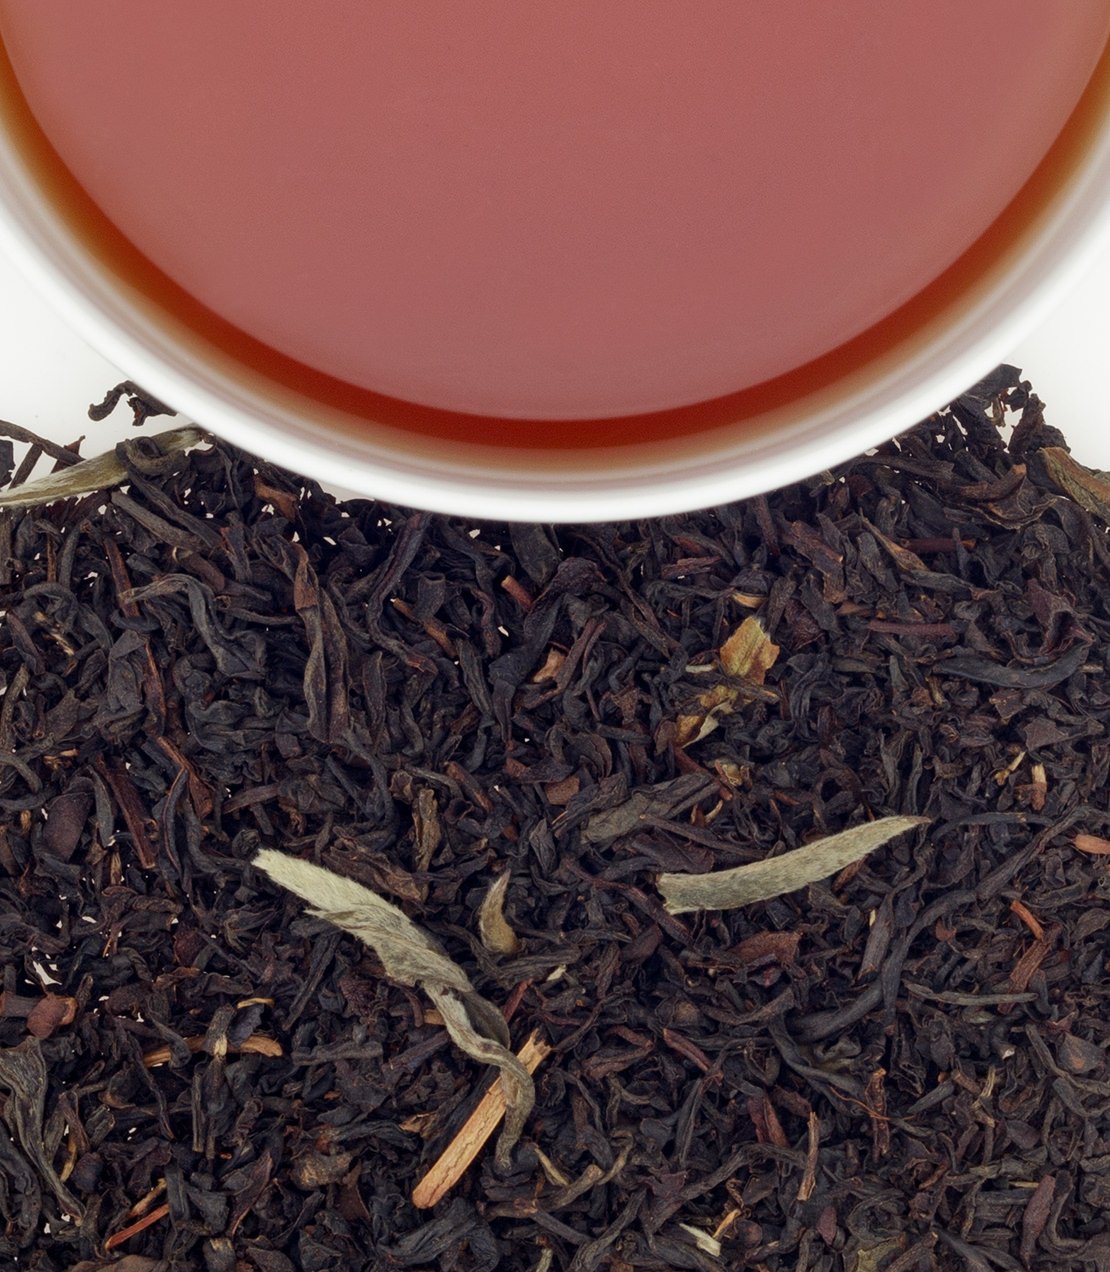 Earl Grey Supreme - Black tea with silver tips, flavoured with natural bergamot  - Harney & Sons Fine Teas Europe